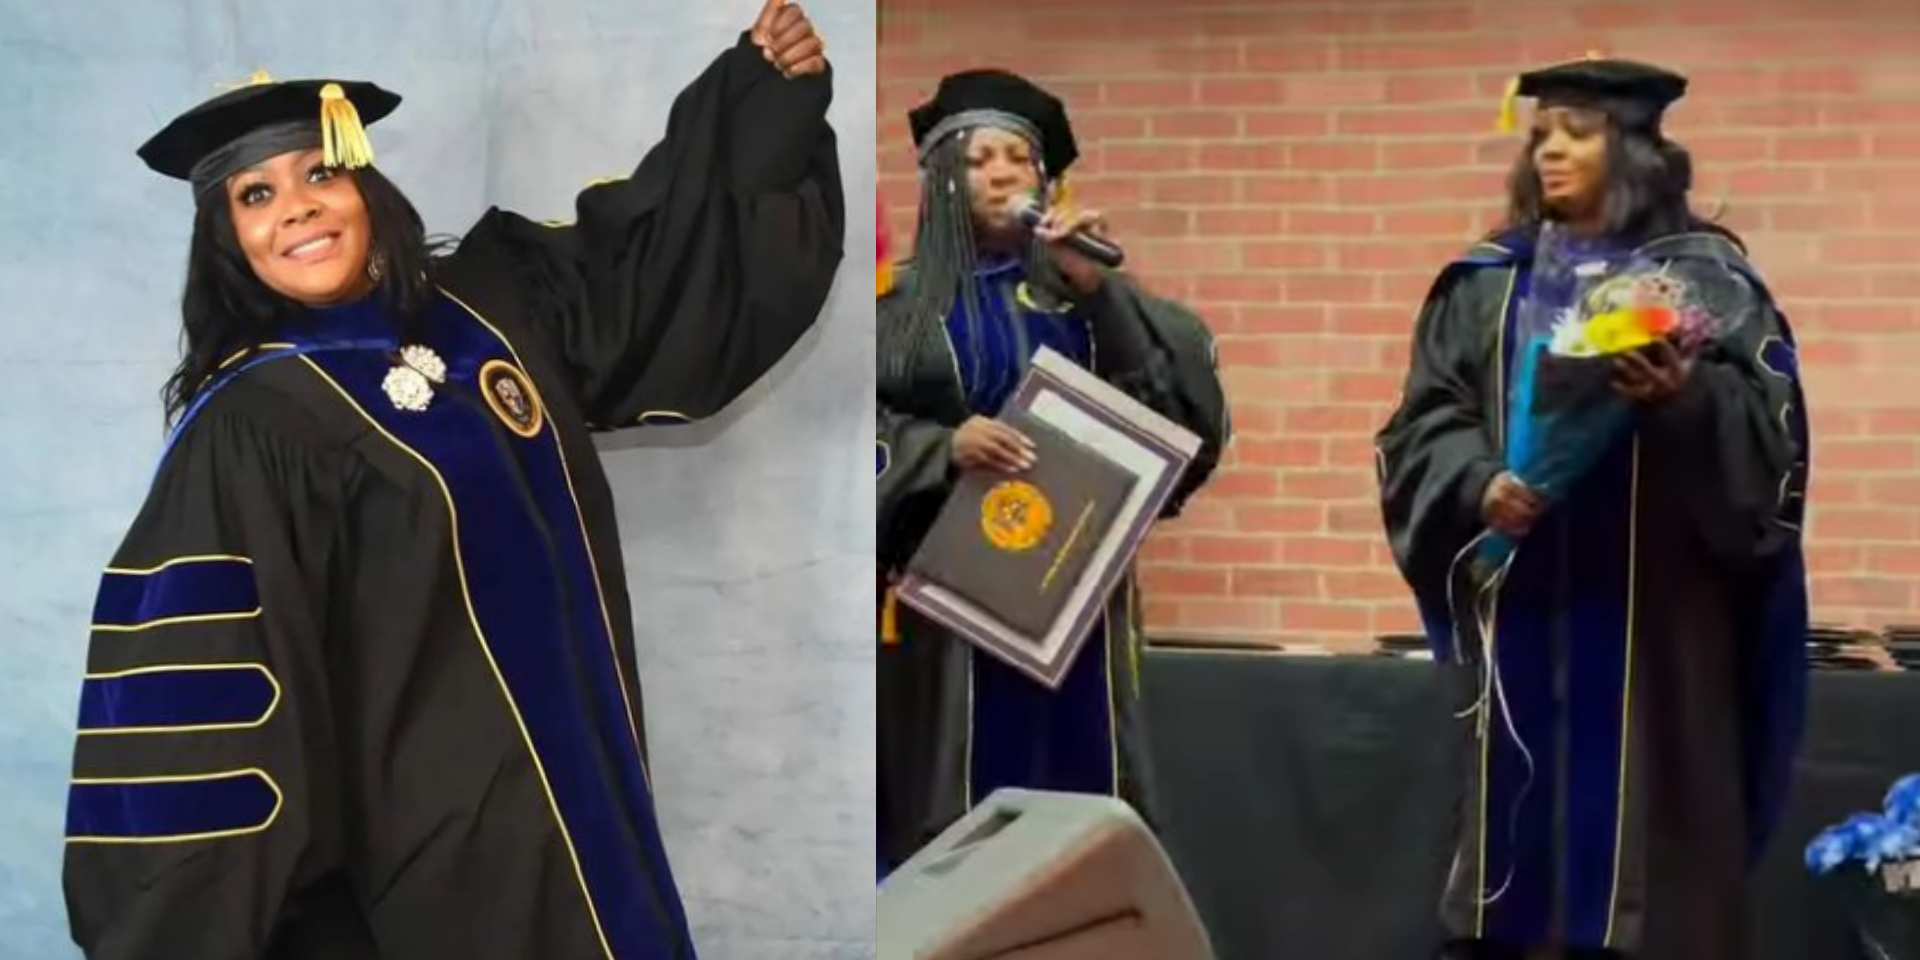 "I'm now officially a professor" - Helen Paul celebrates as she's appointed professor at US university [Video]